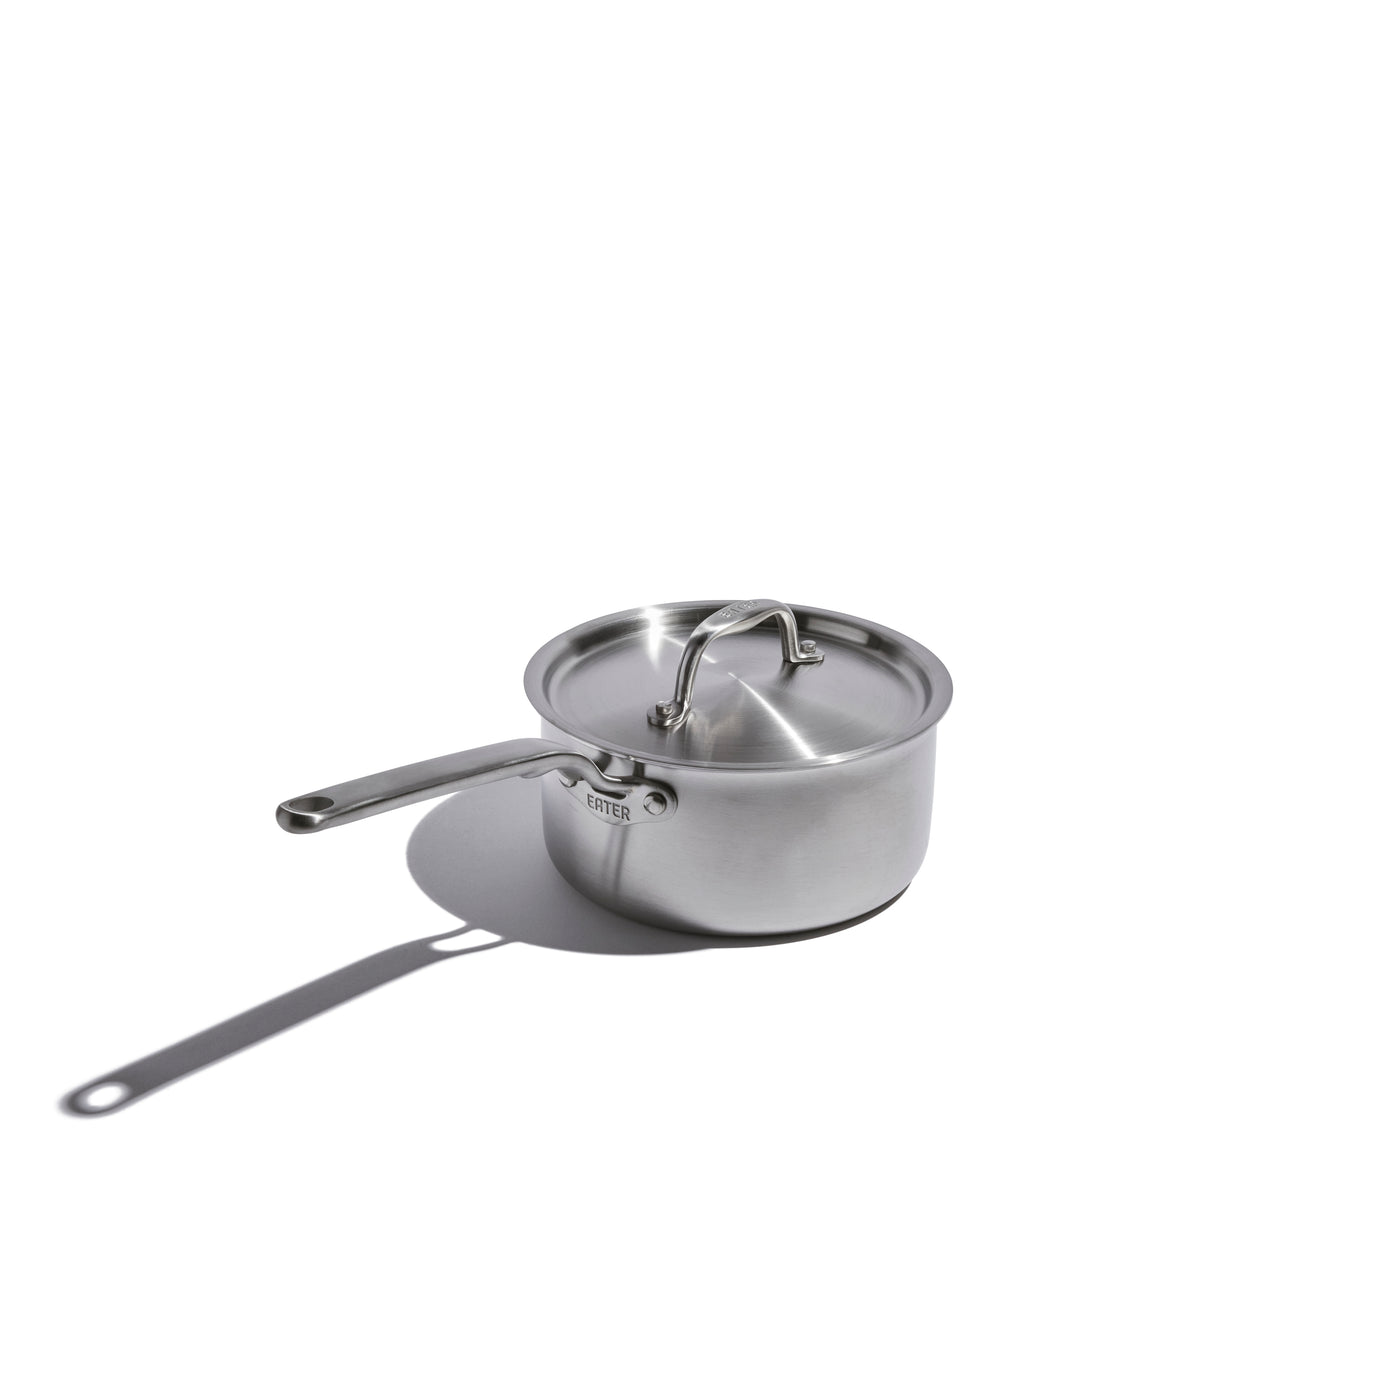 Heritage Steel 5-ply Stainless 3 Qt Saucier Pan with Lid